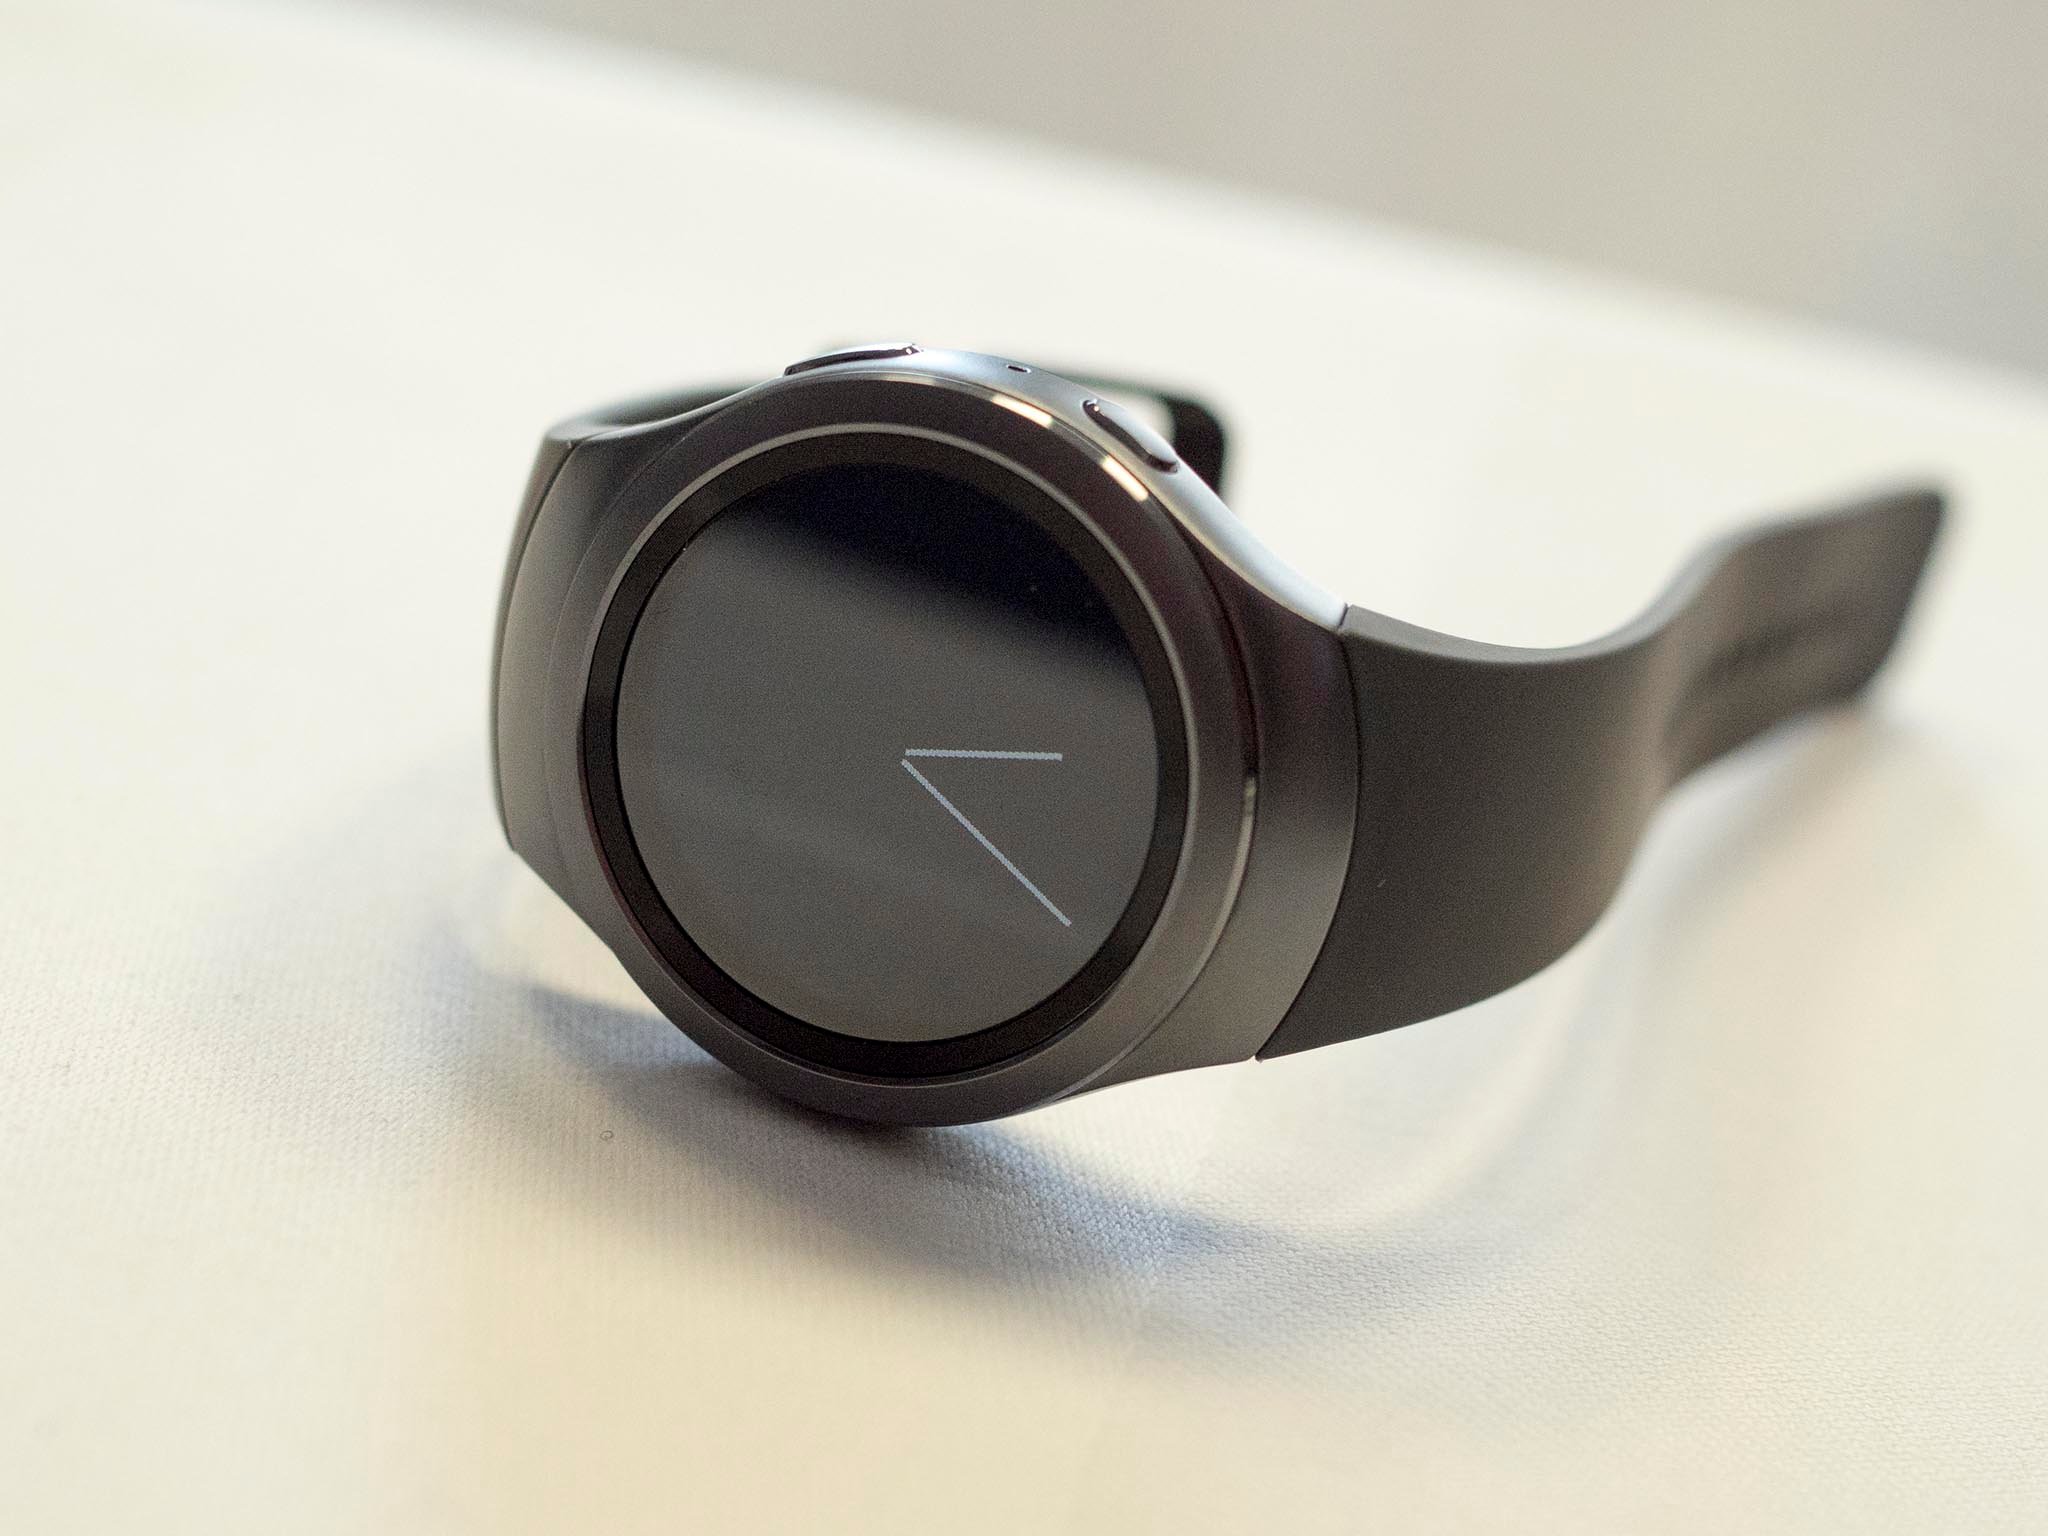 Here are the phones compatible with the Samsung Gear S2